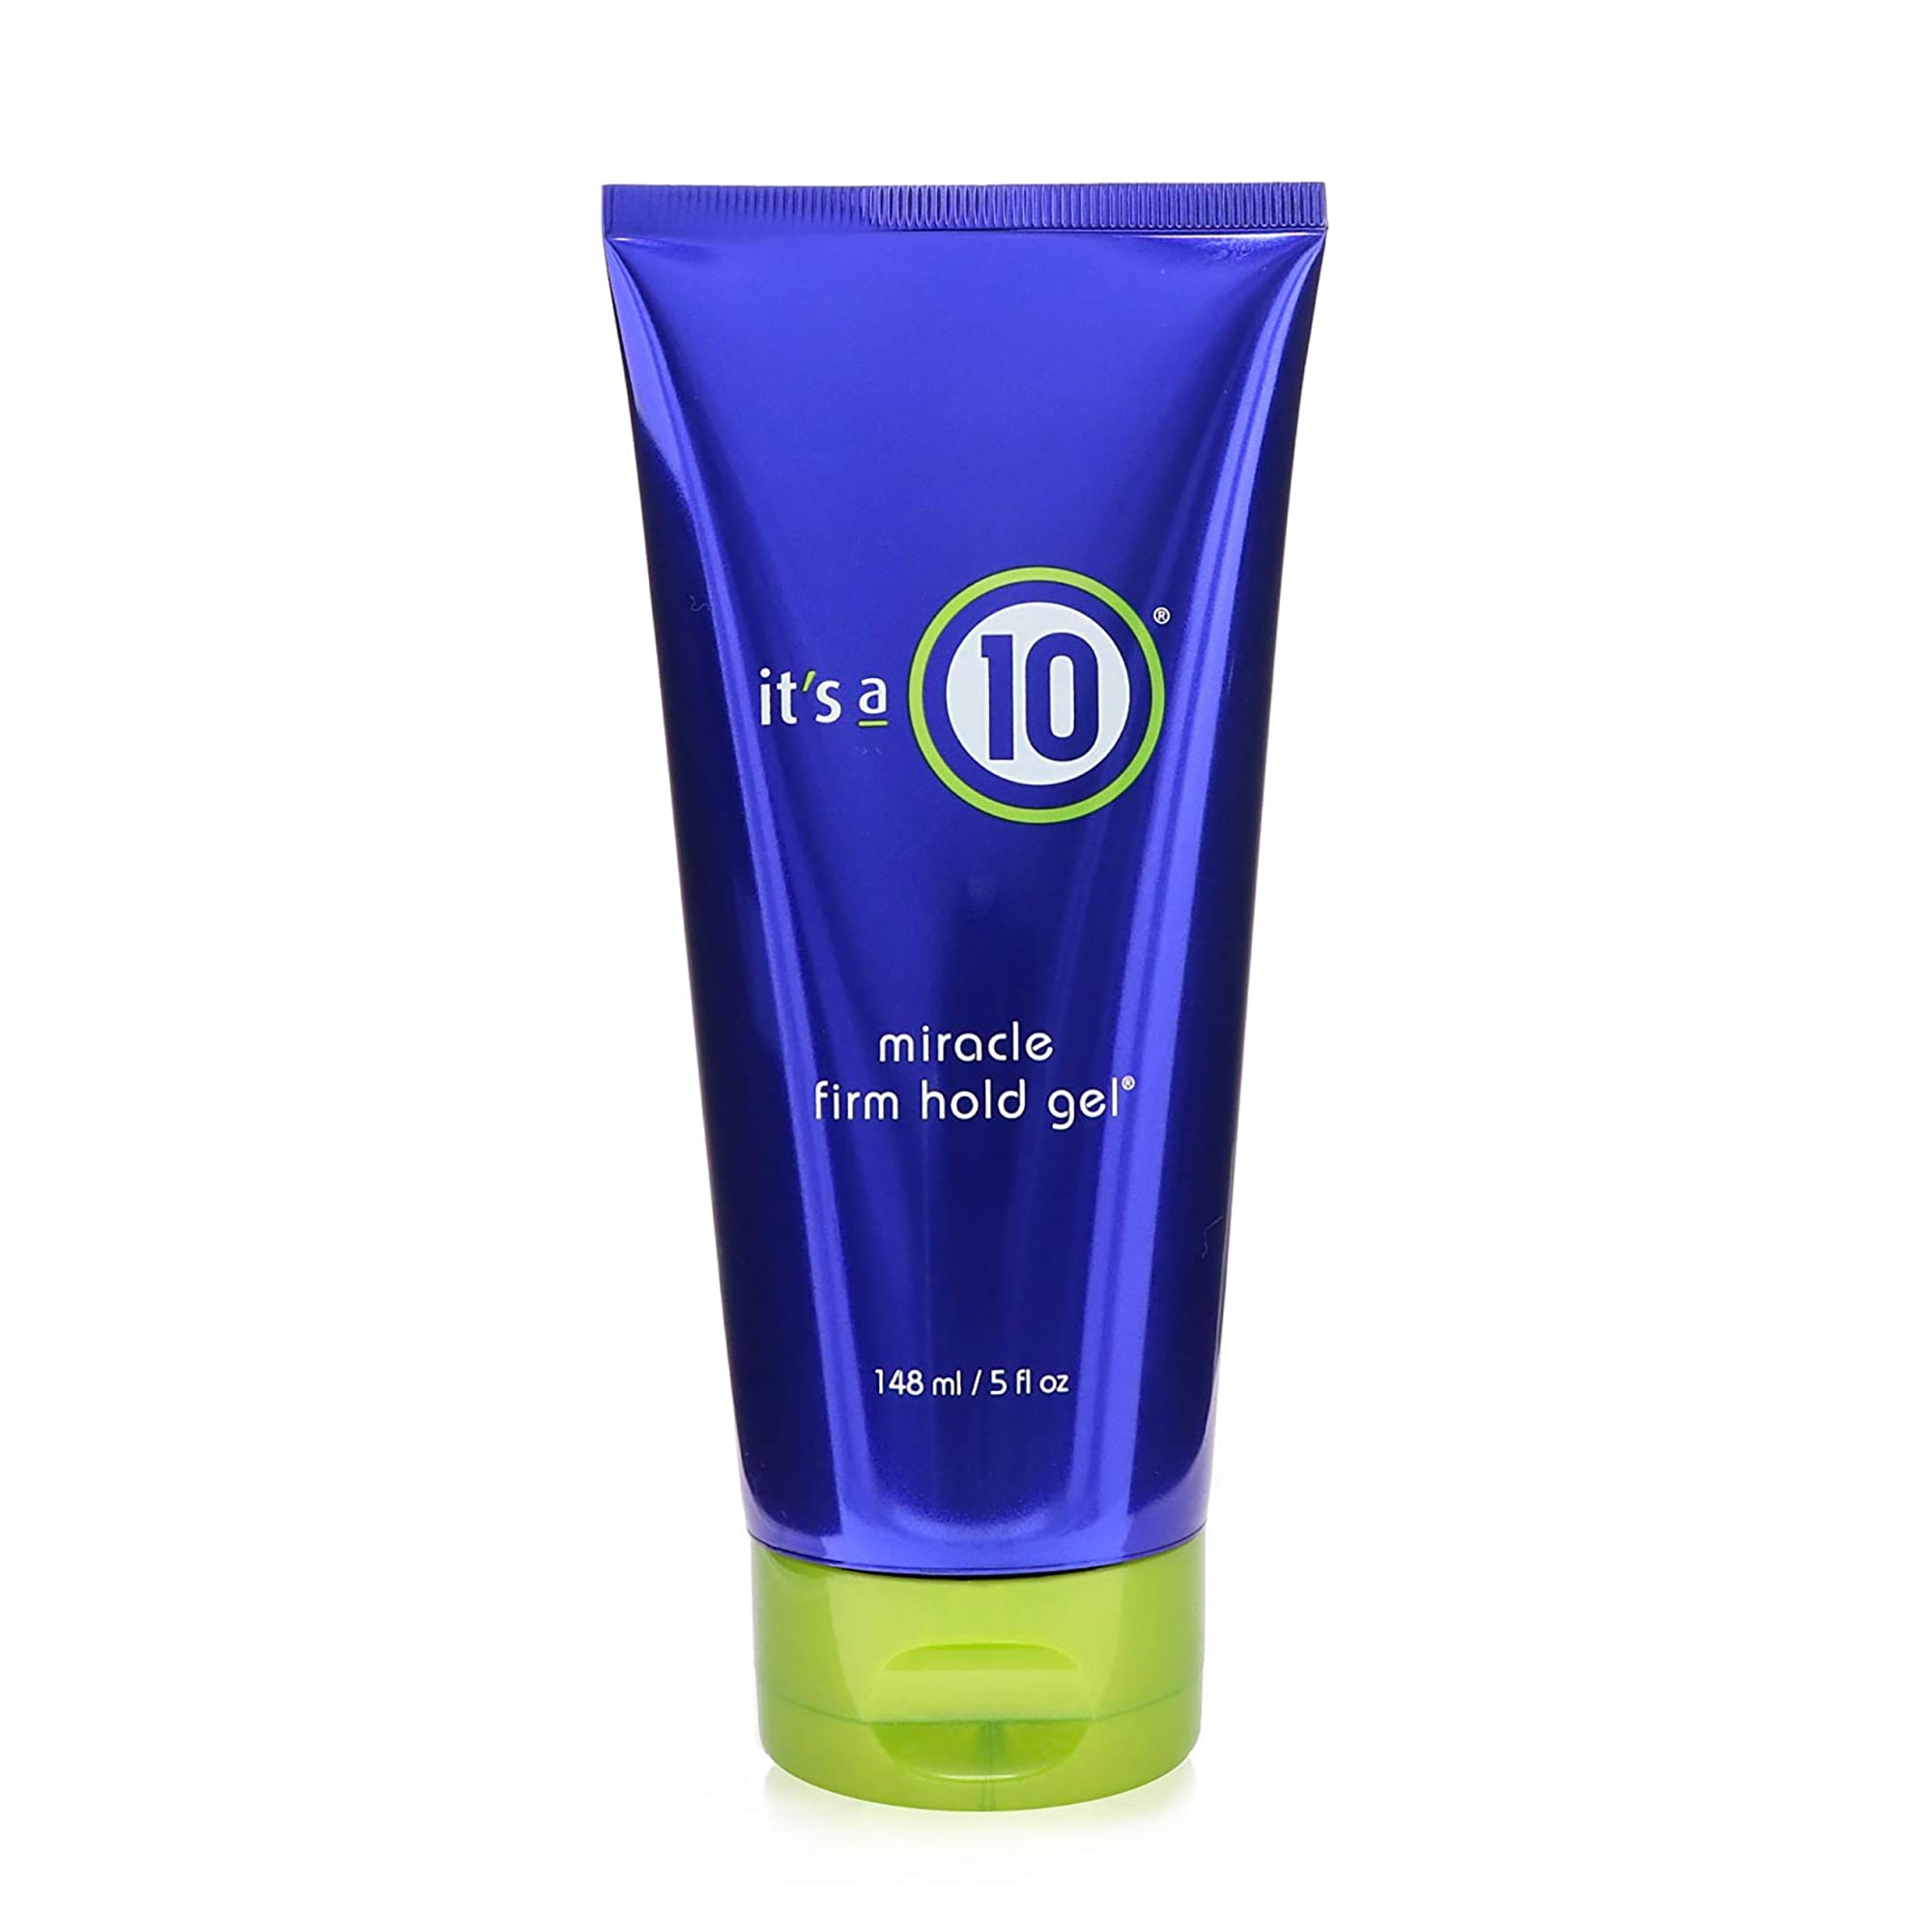 It's a 10 Miracle Firm Hold Gel / 5.OZ